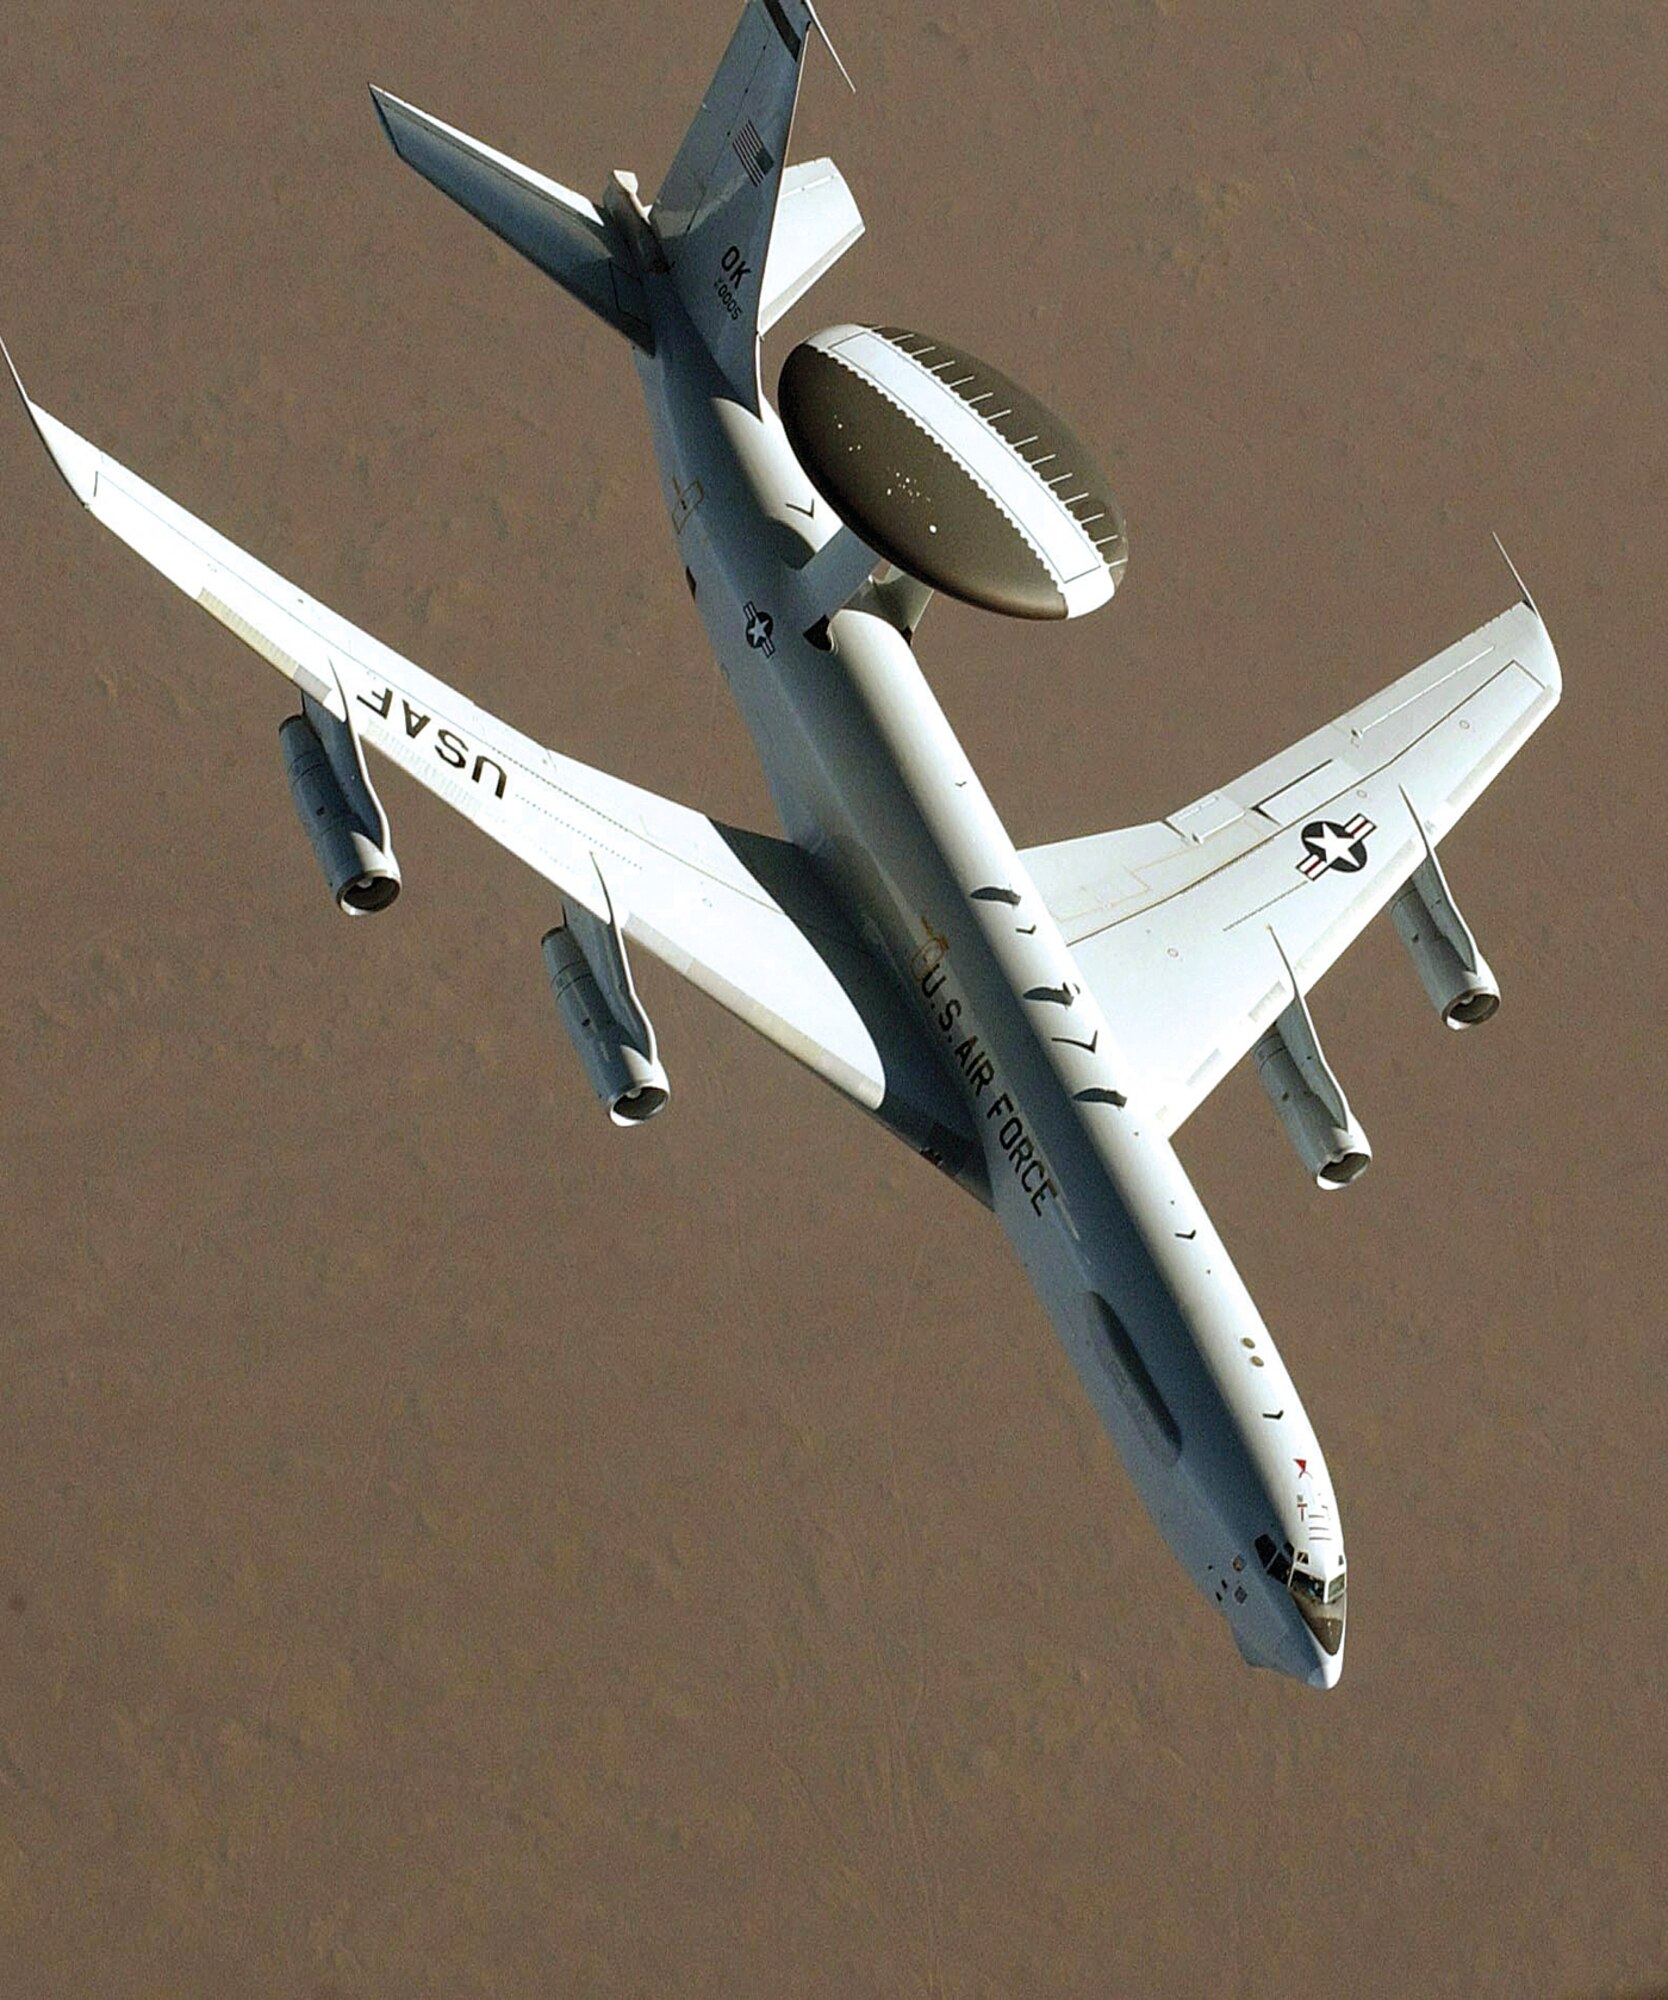 E-3 Sentry (AWACS)
Primary function: Airborne battle management, surveillance, command, control and communications. Speed: 360 mph. Dimensions: Wingspan 130 ft. 10 in.; length 145 ft. 8 in.; height 41 ft. 4 in.; rotodome, 30 ft. diameter, 6 ft. thick, mounted 11 ft. above fuselage. Range: More than eight hours unrefueled. Crew: 17-23. (U.S. Air Force photo by Master Sgt. Dave Ahlschwede)